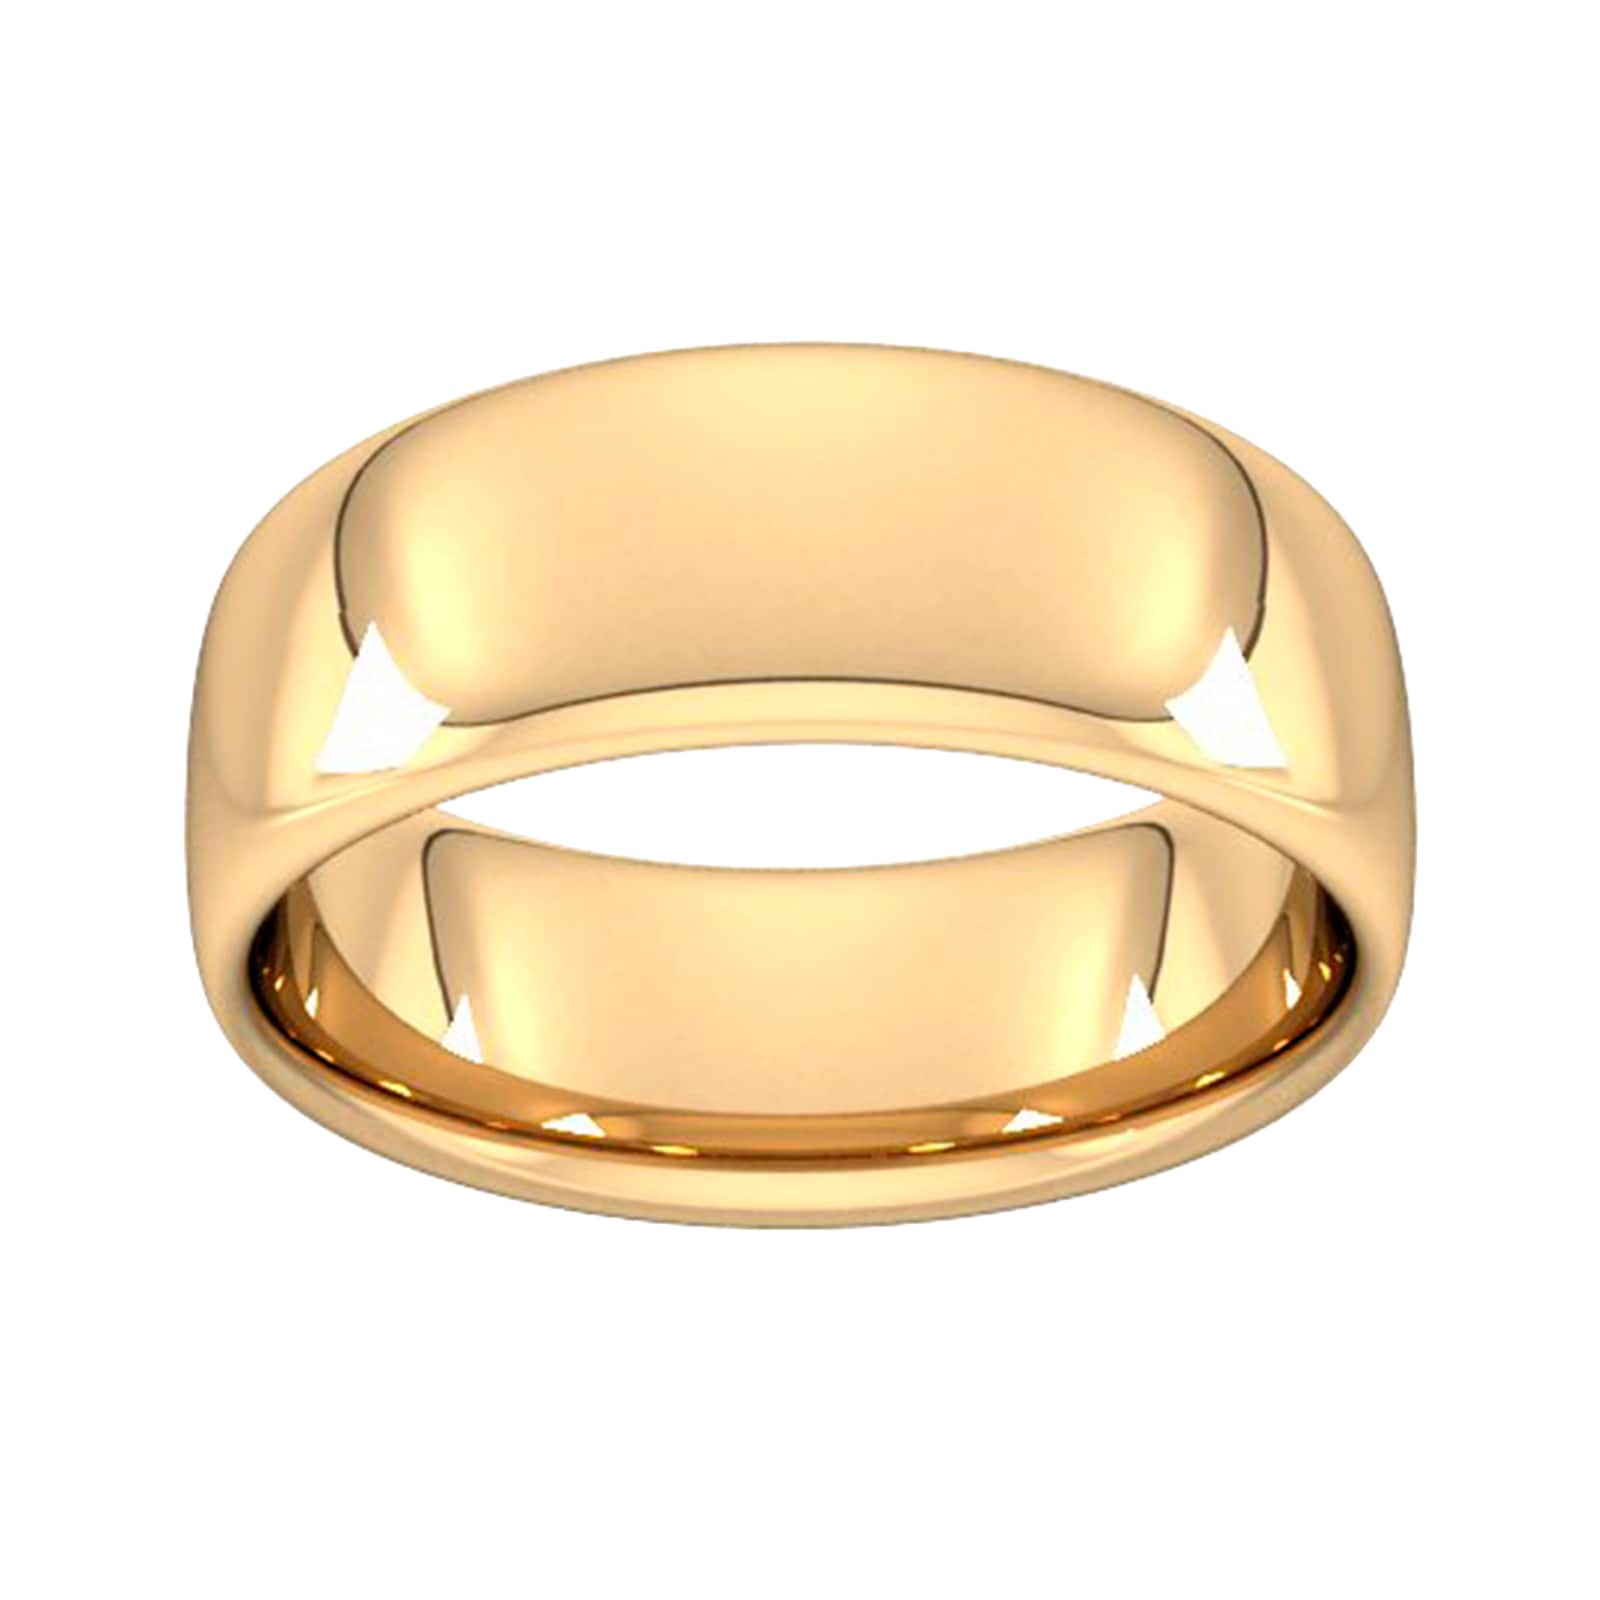 8mm Slight Court Heavy Wedding Ring In 18 Carat Yellow Gold - Ring Size Y